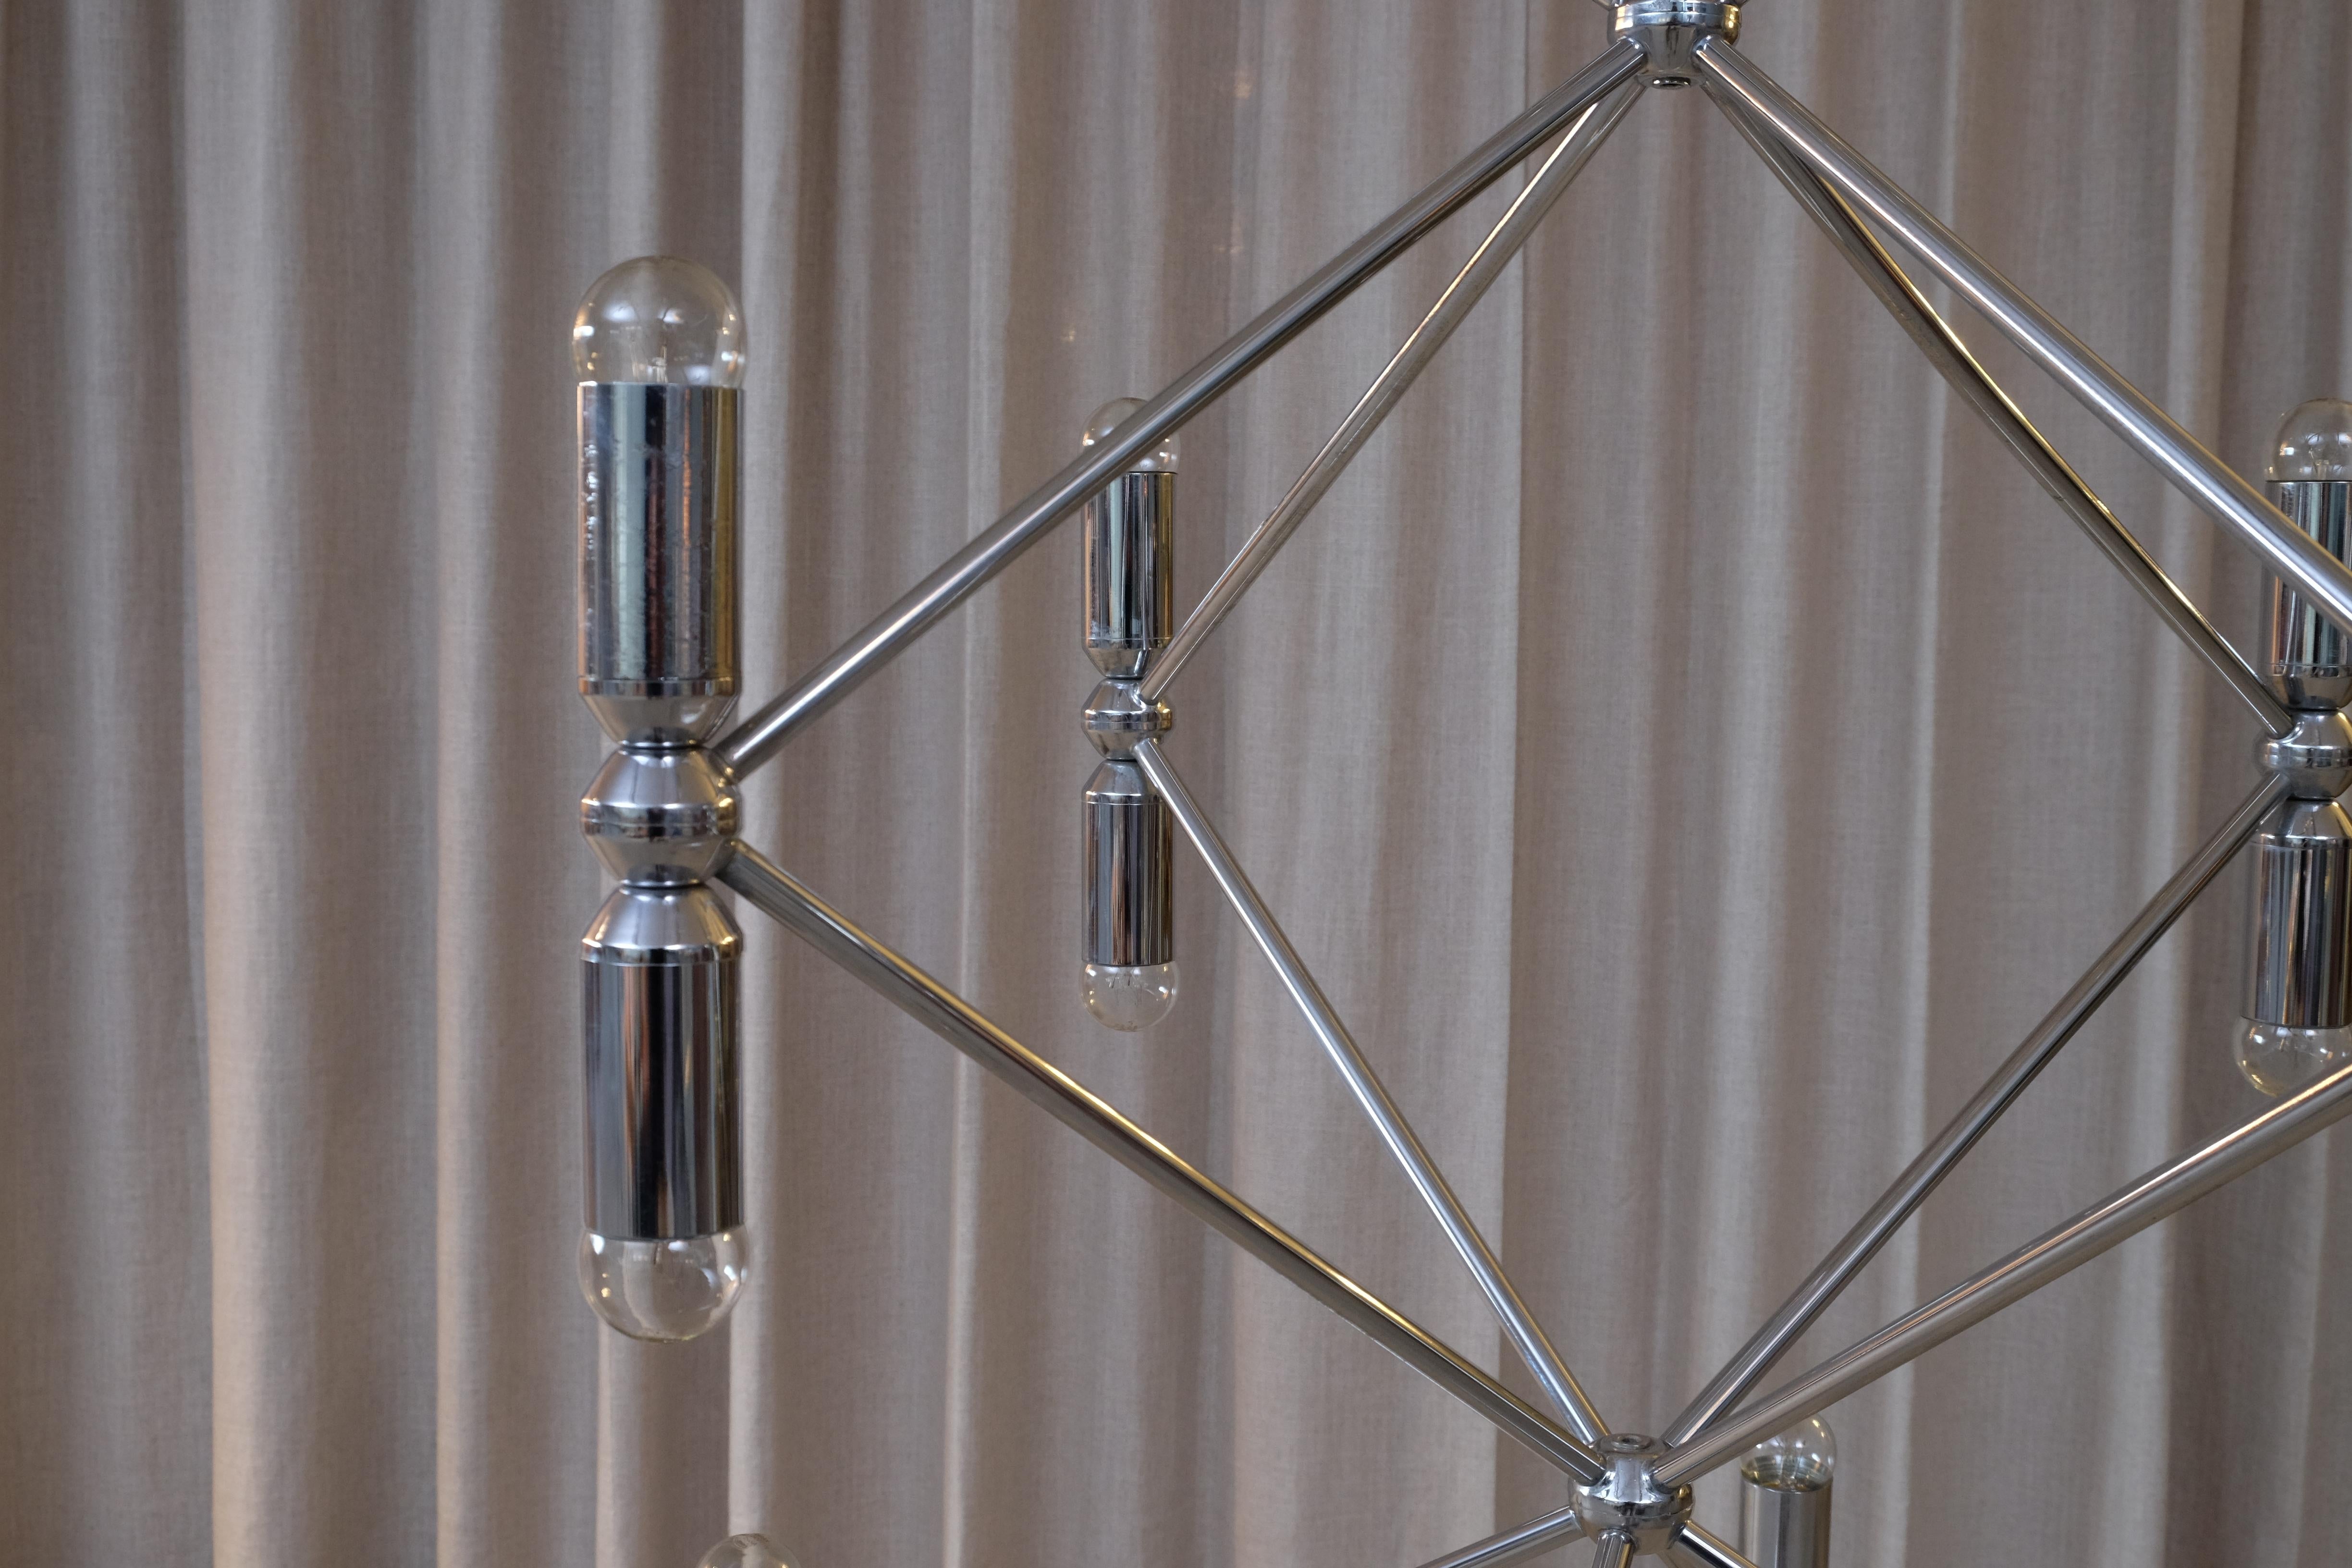 Rare 12-Arm Chandelier with 24 Lights in Chrome, 1970s For Sale 3